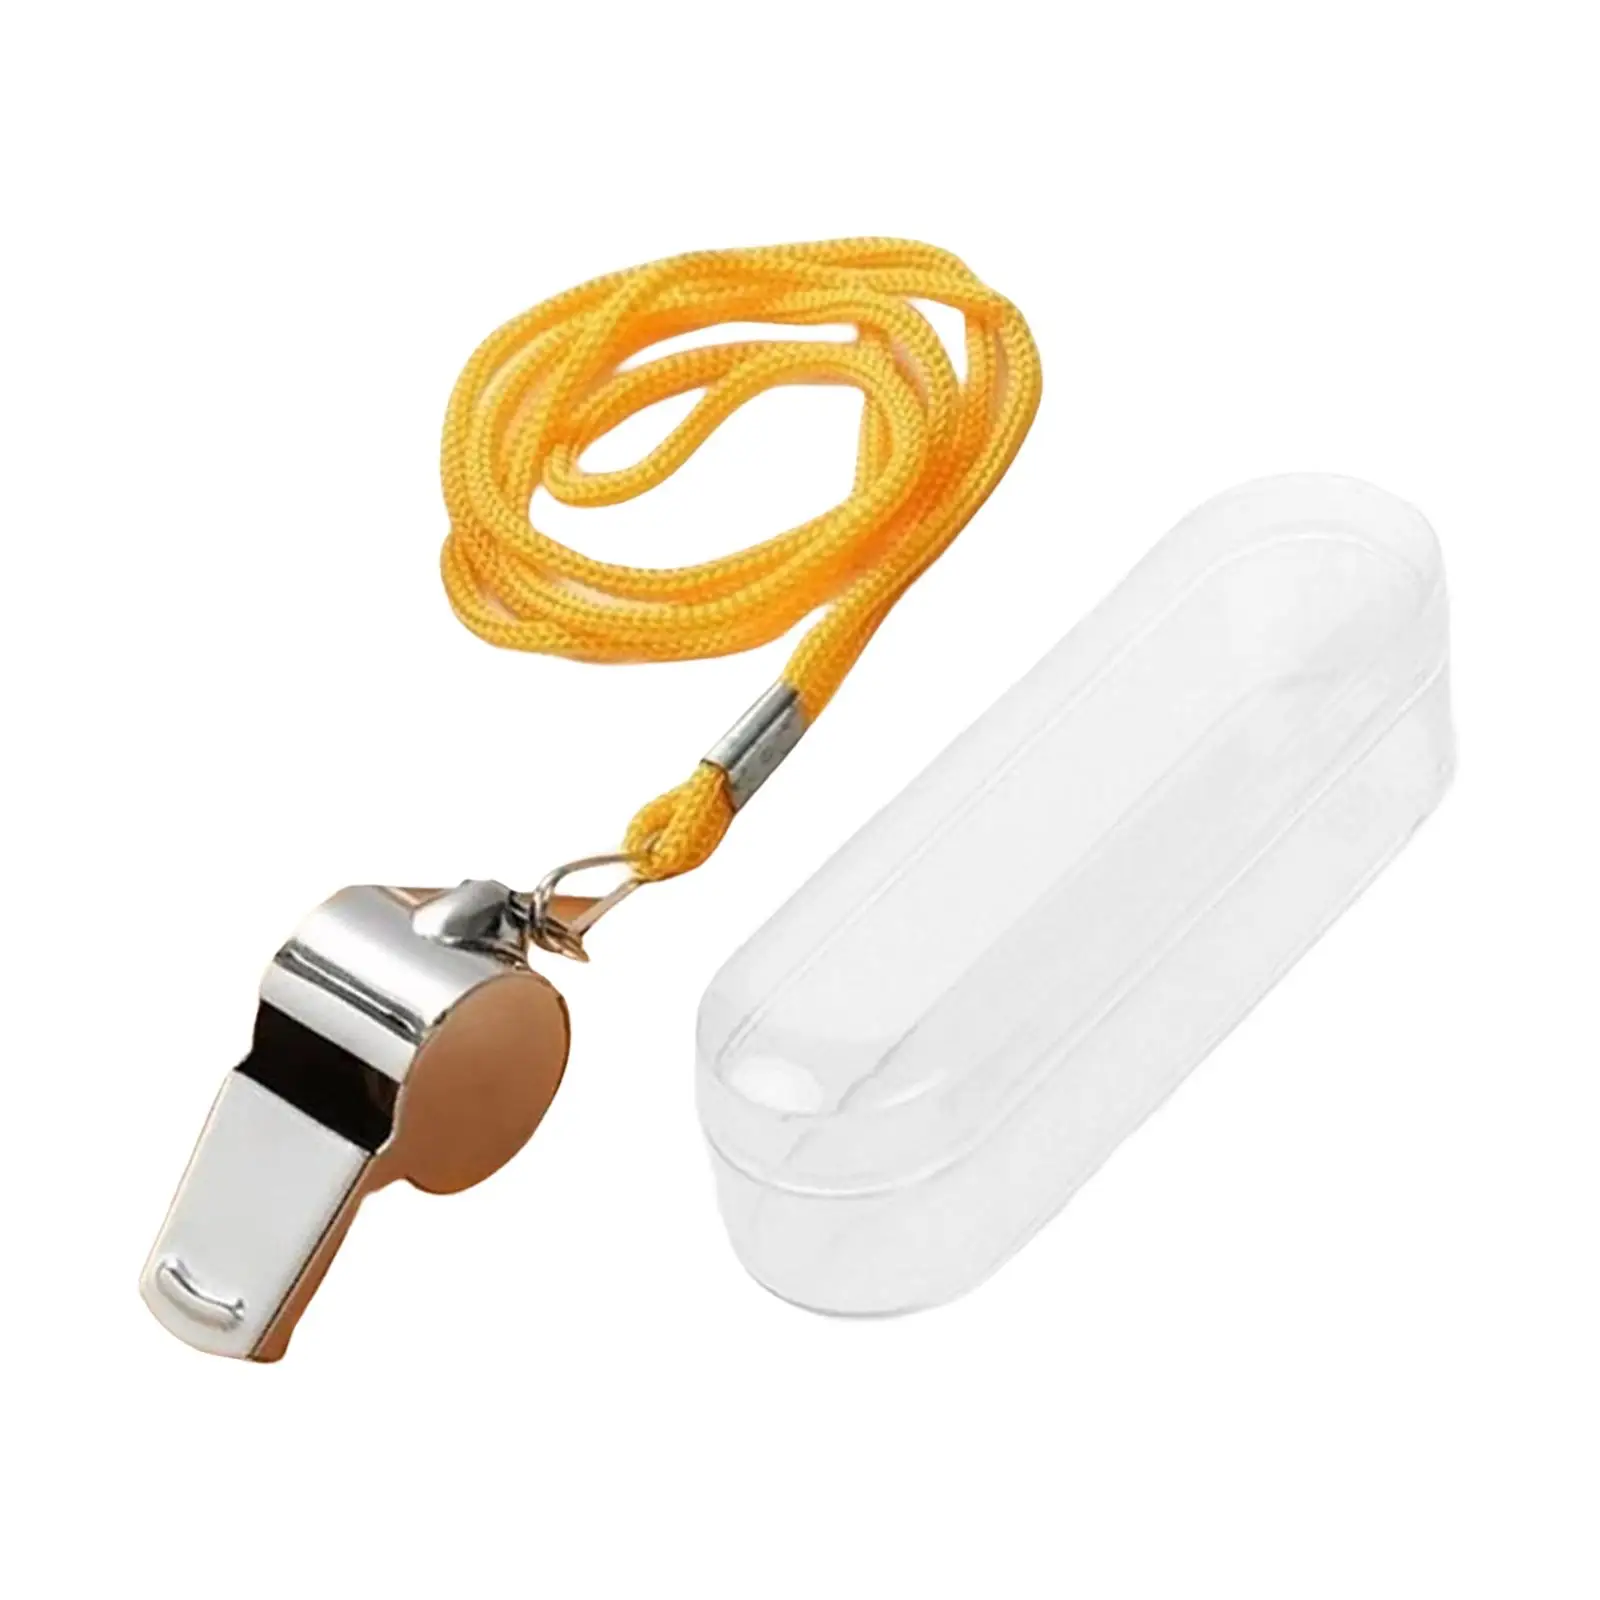 Stainless Steel Sports Whistles Loud Crisp Sound Referee Whistle Metal Whistle for Volleyball Soccer Emergency Training Outdoor